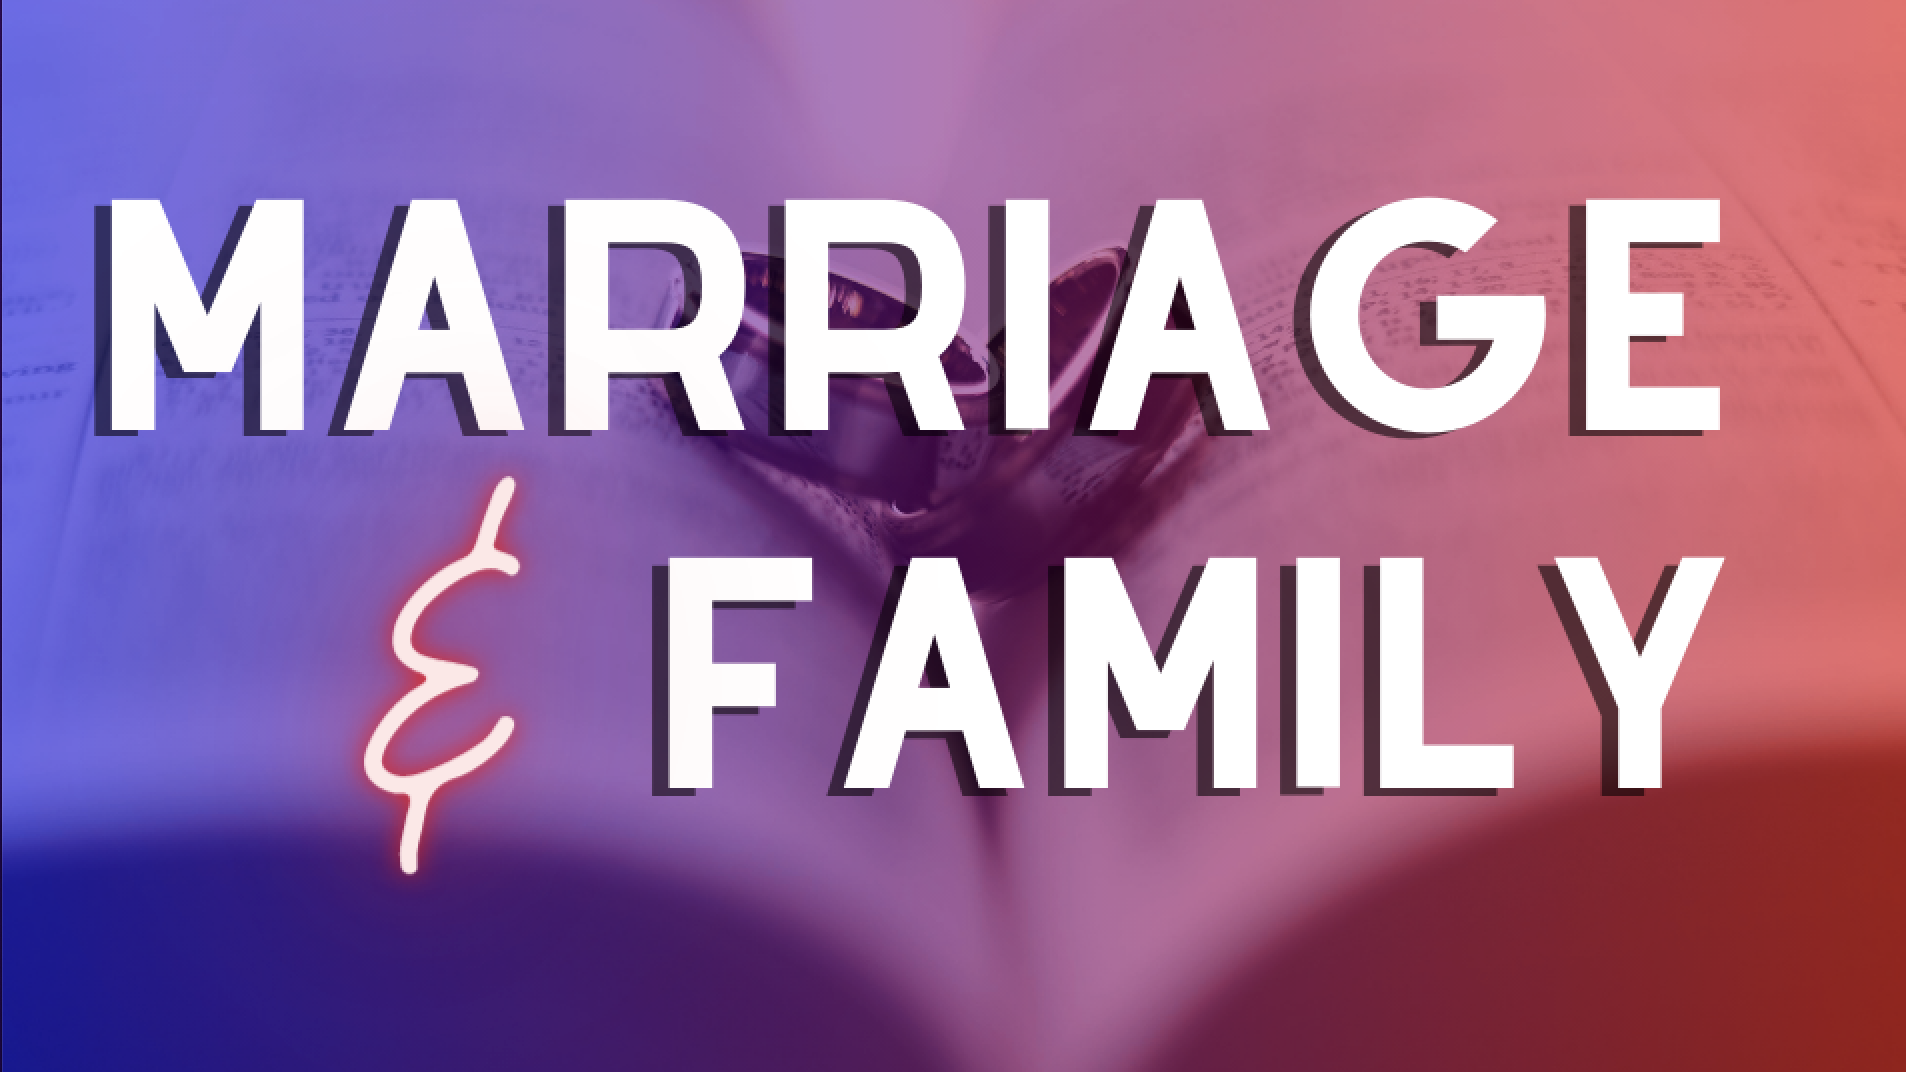 Marriage & The Family